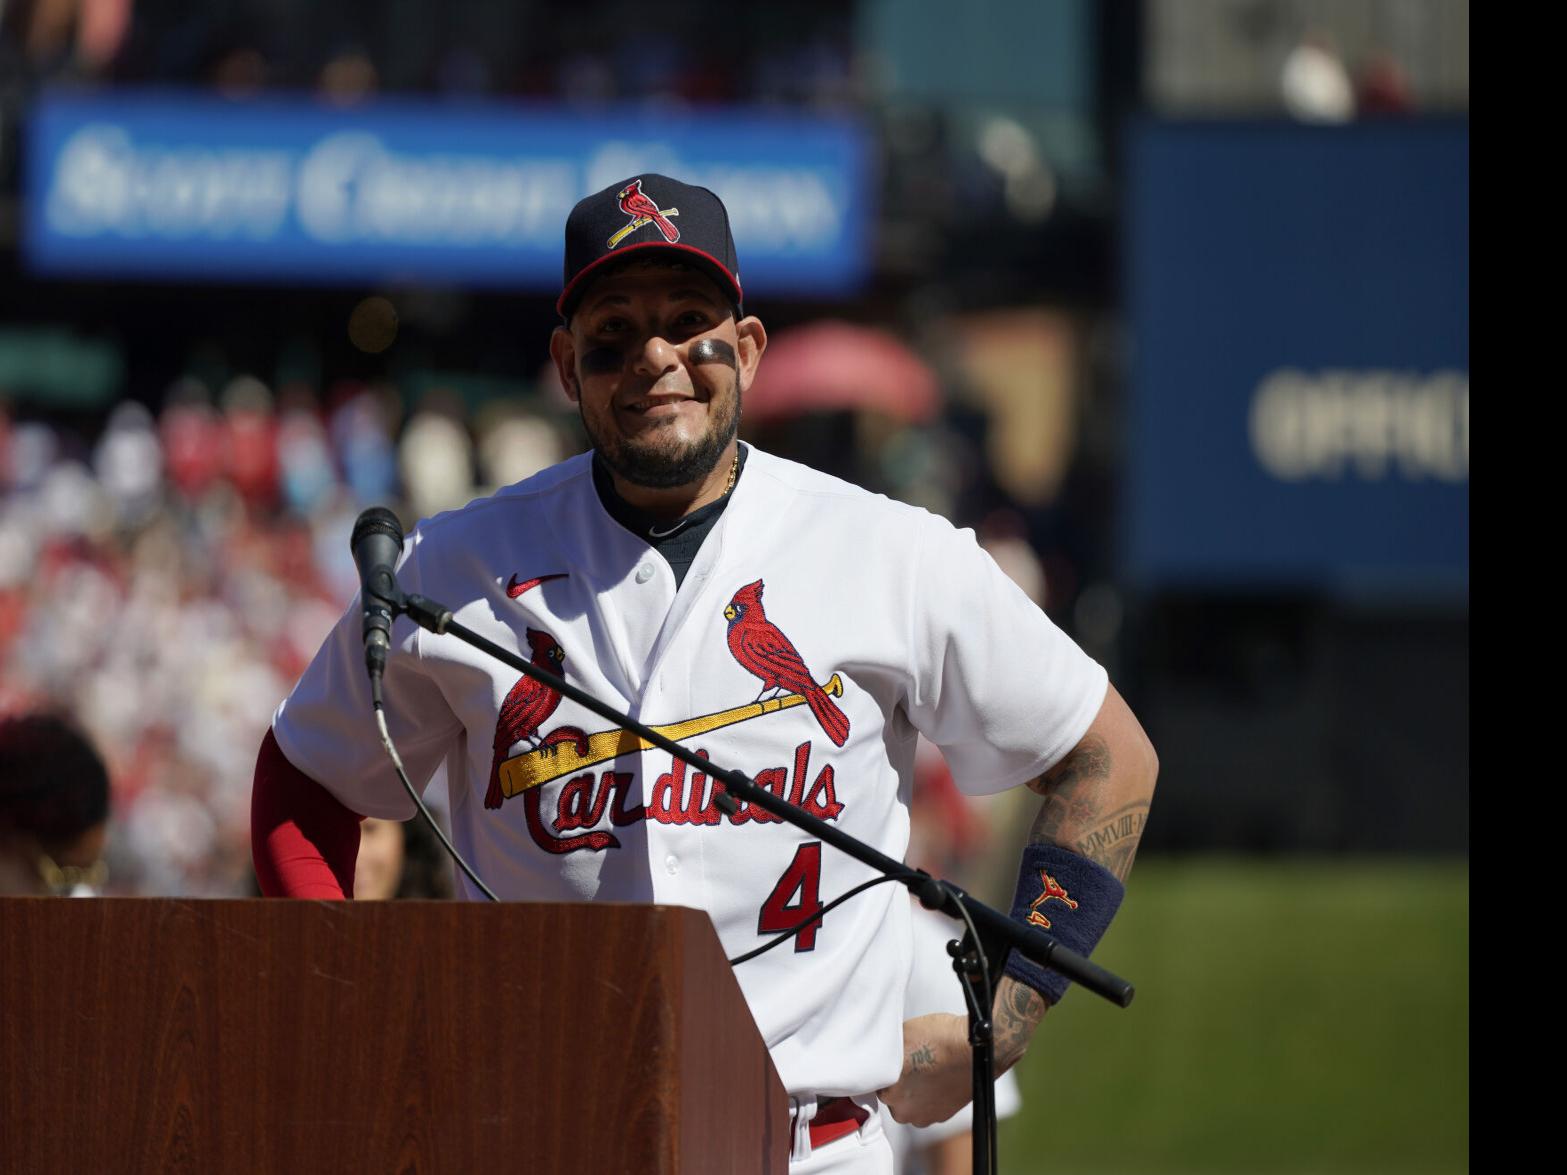 St. Louis Cardinals Catcher Yadier Molina Returns After Missing Weekend For  'Business Reasons' in Puerto Rico - Fastball